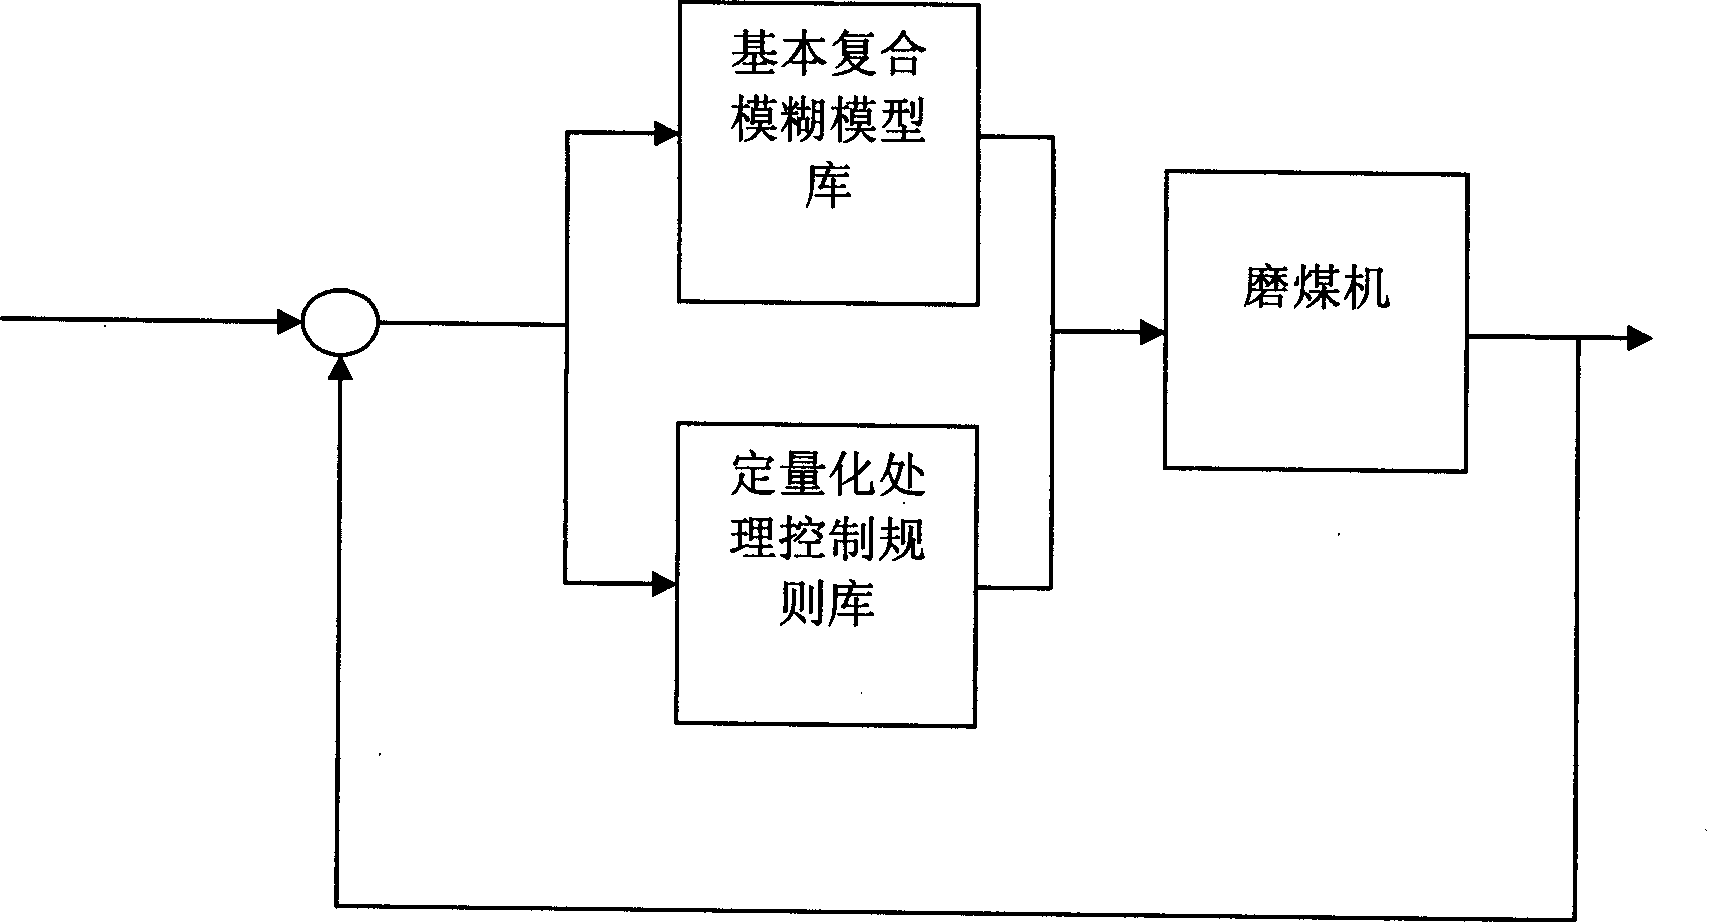 Fuzzy control method for middle storage type coal mill